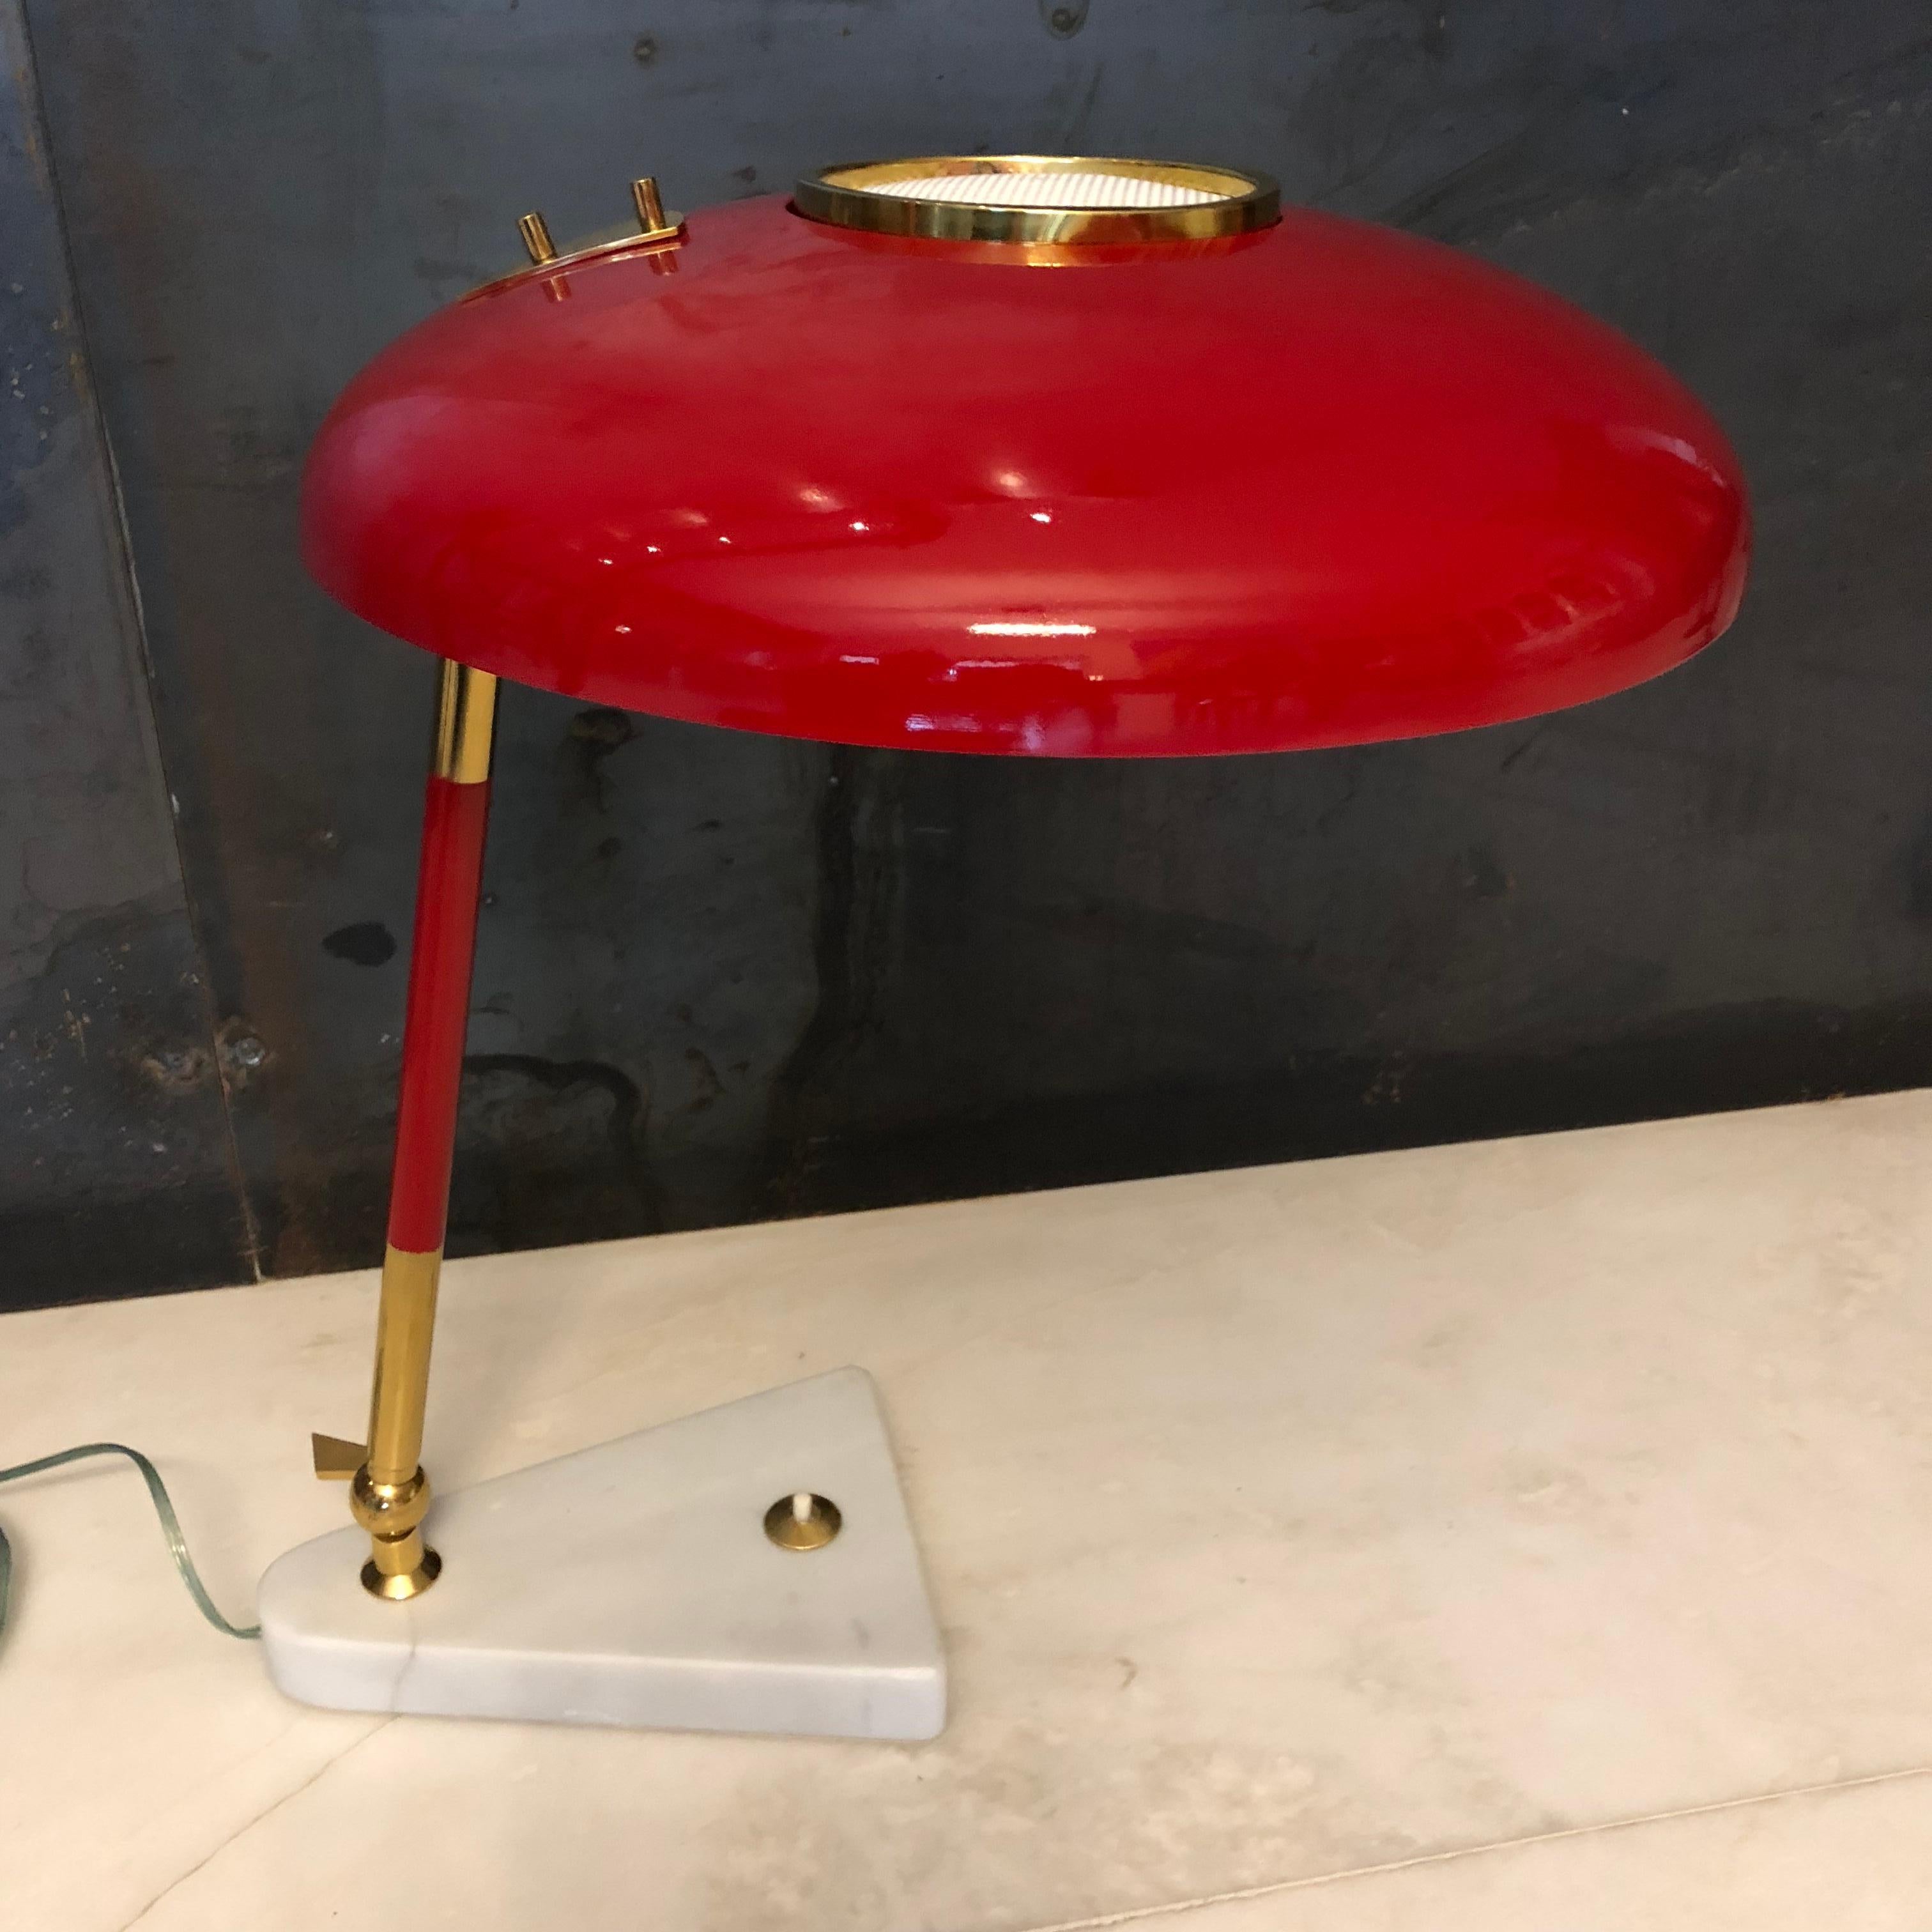 This piece was produced by the Italian brand Stilux Milano during the 1950s. It is an articulated desk lamp with a marble base, a brass structure, and a lacquered aluminum diffuser. It has been rewired to EU standards.